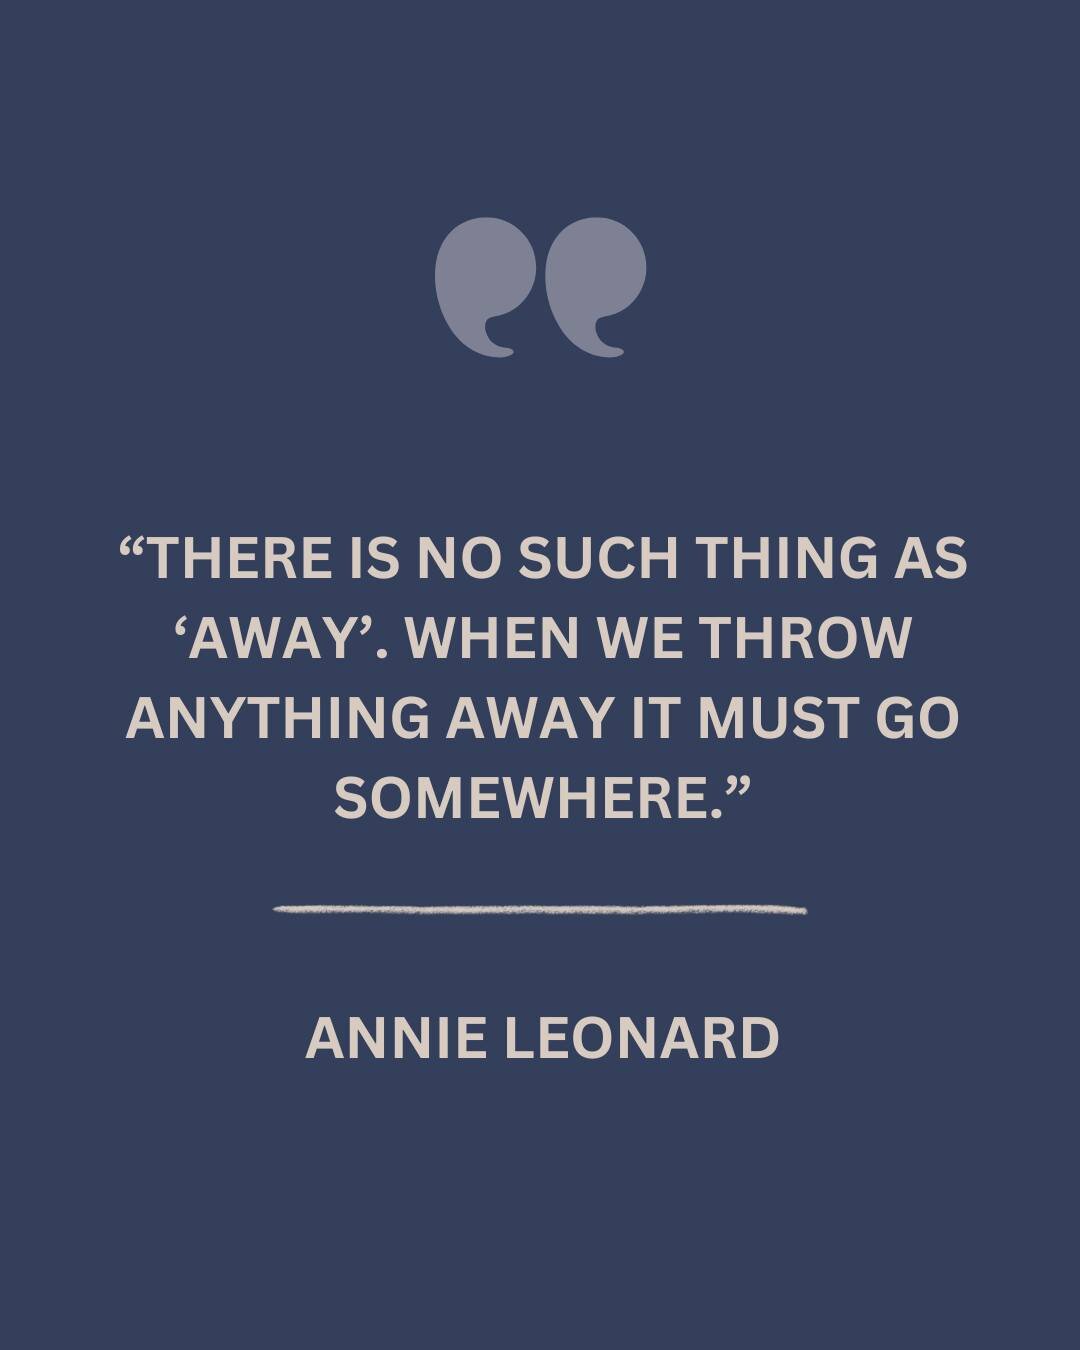 Such a true quote. &quot;Away&quot; is an imaginary place in our minds so we don't have to think about the trash we produce. The truth is any time we throw something into a waste bin, it goes somewhere; a lot of the times, not the right place. Let's 